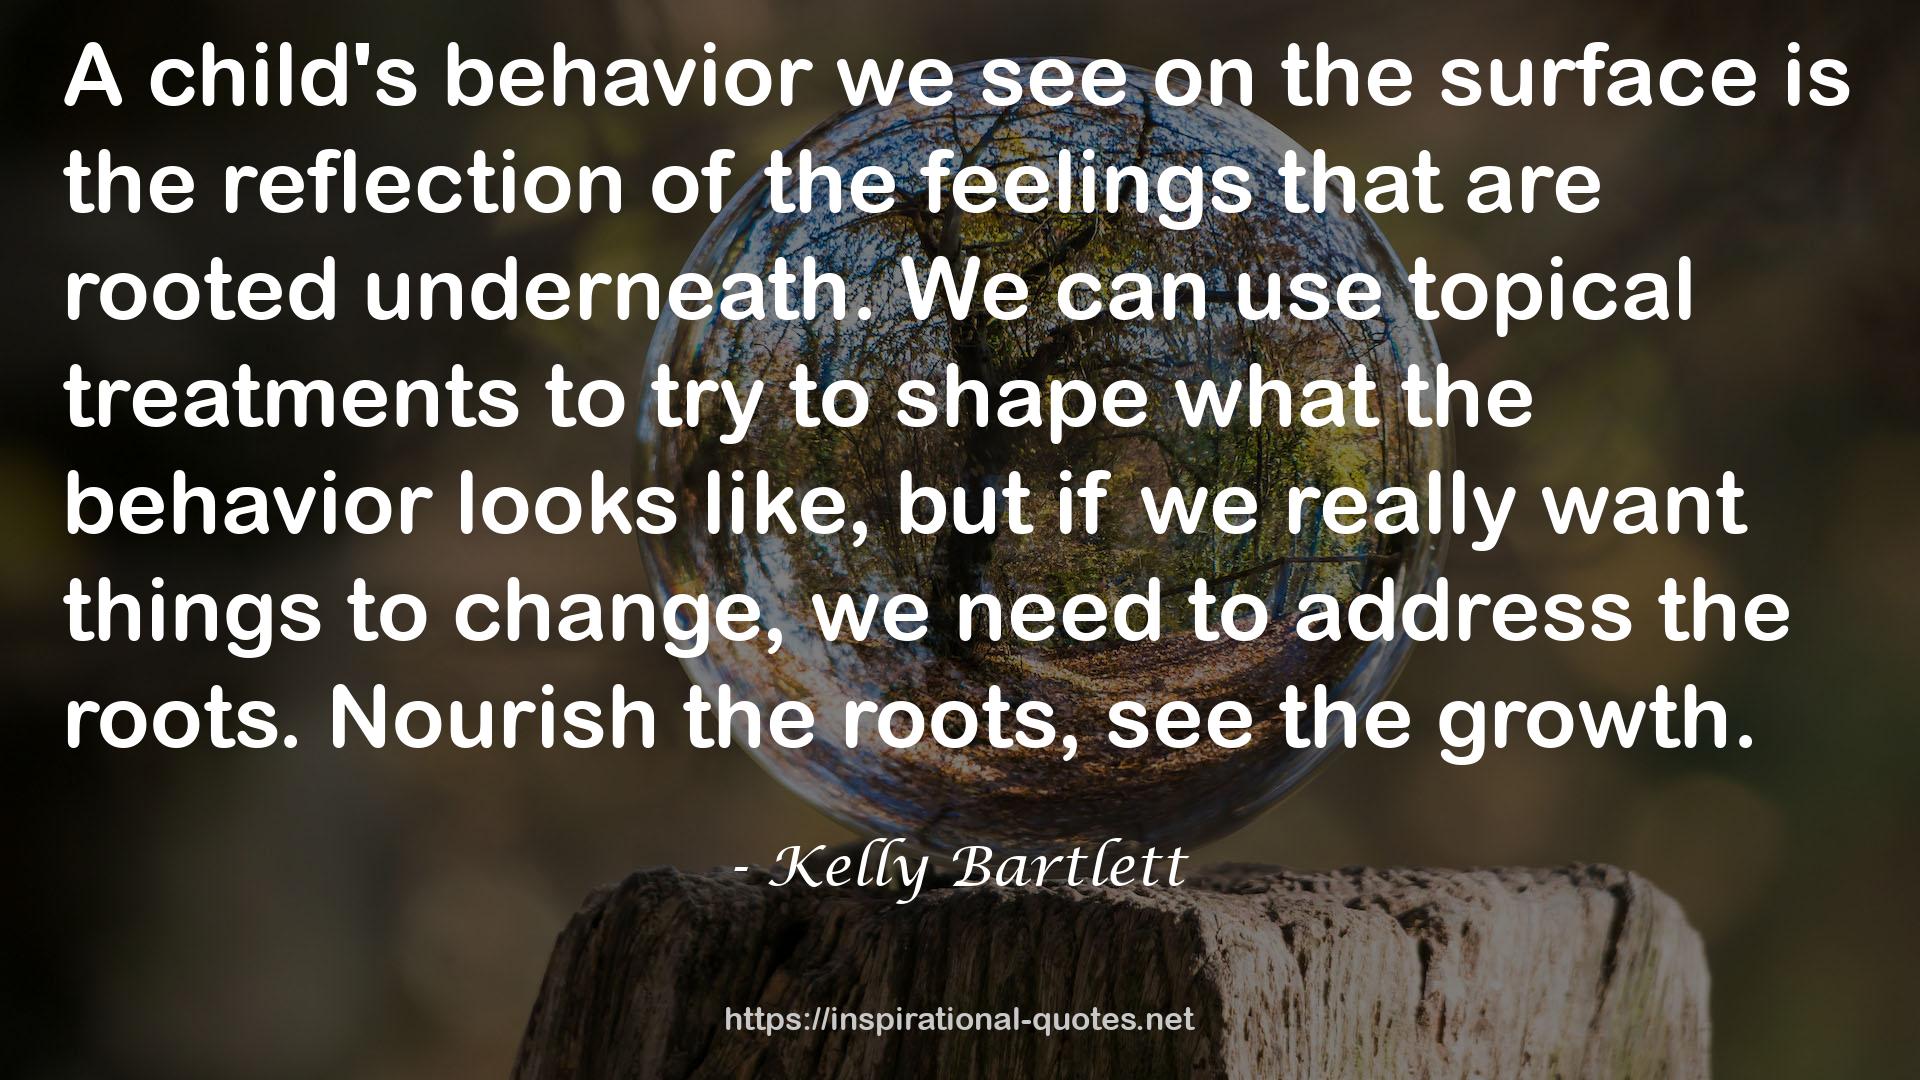 Kelly Bartlett QUOTES